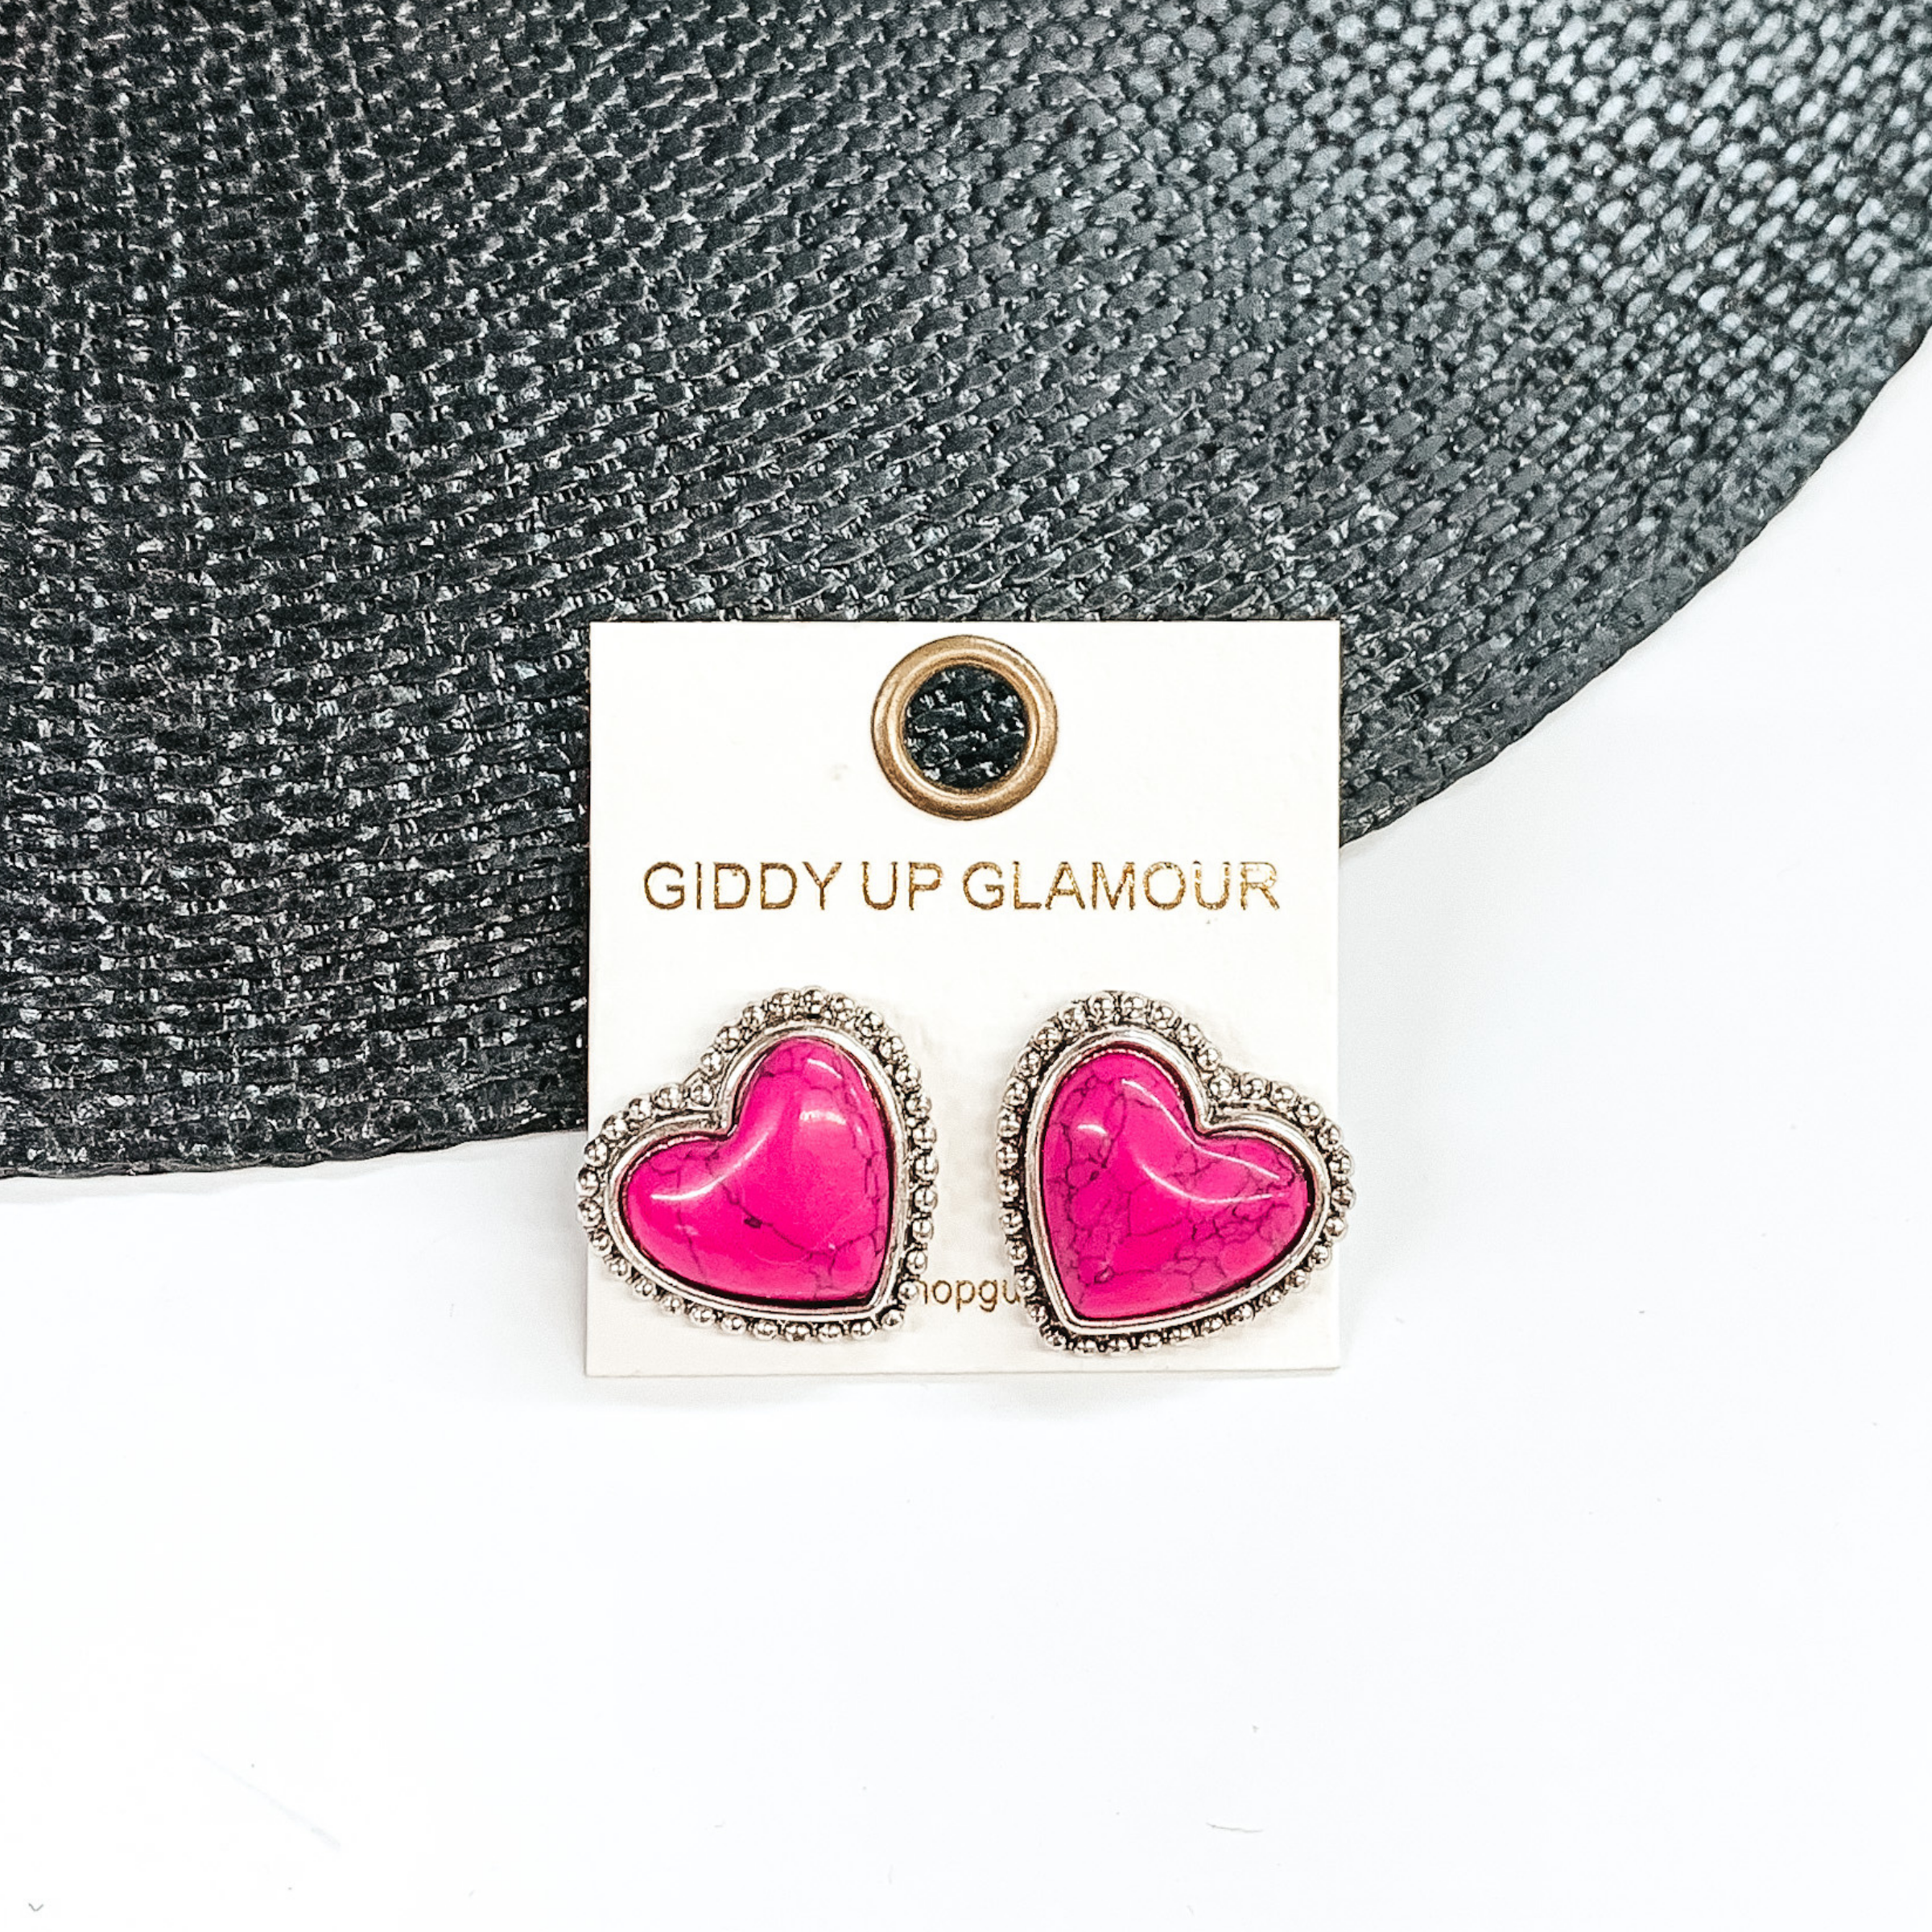 Pink, heart stone earrings with a silver backing and outline. These earrings are pictured on a white earrings holder. Then pictured on a white and black background.